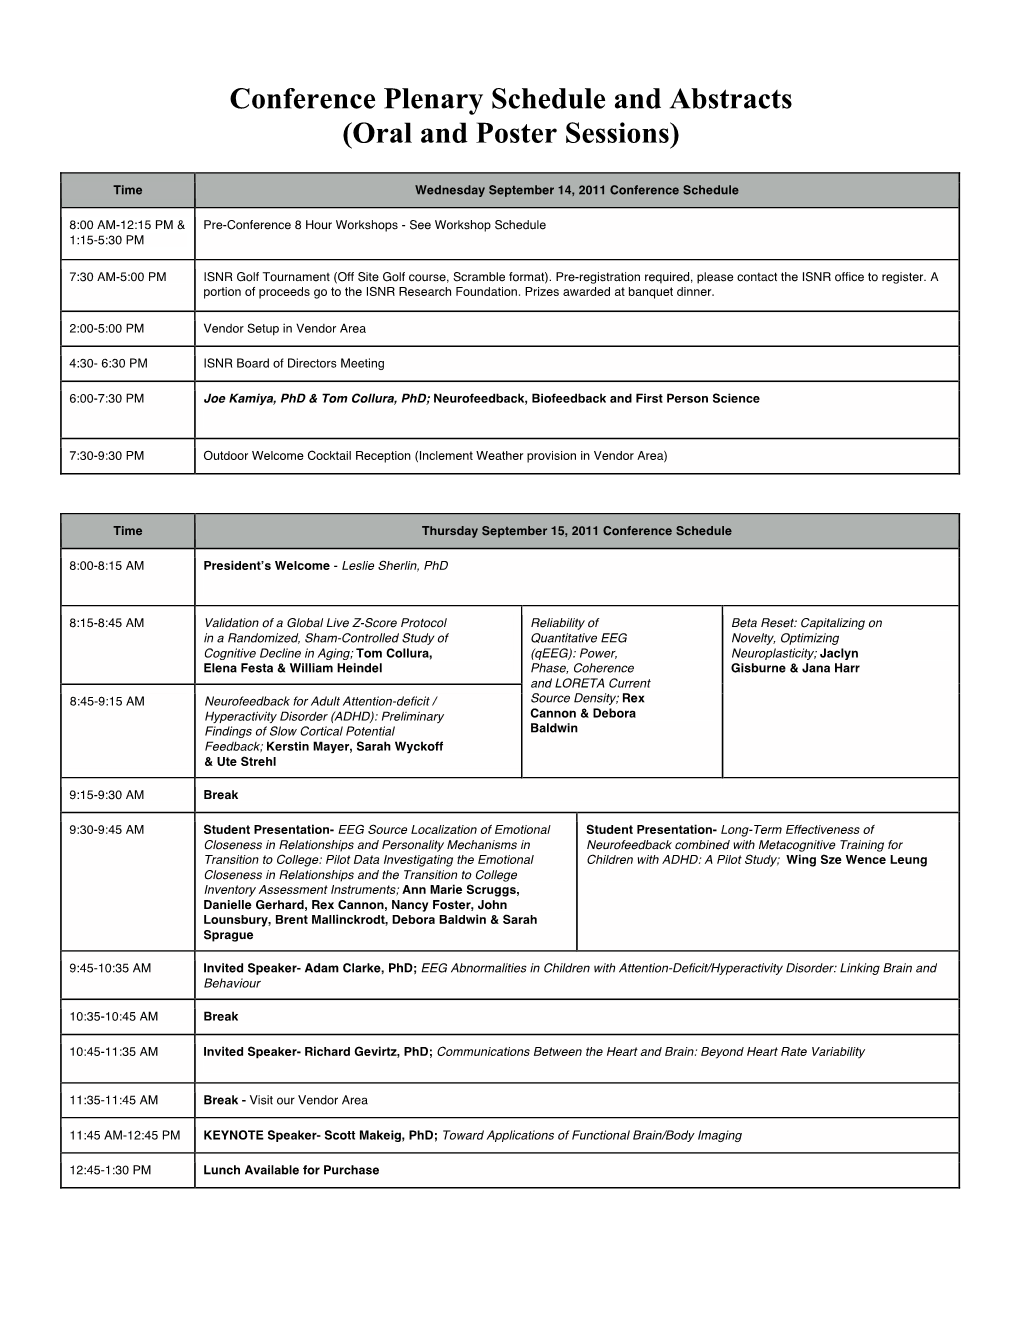 Conference Plenary Schedule and Abstracts (Oral and Poster Sessions)